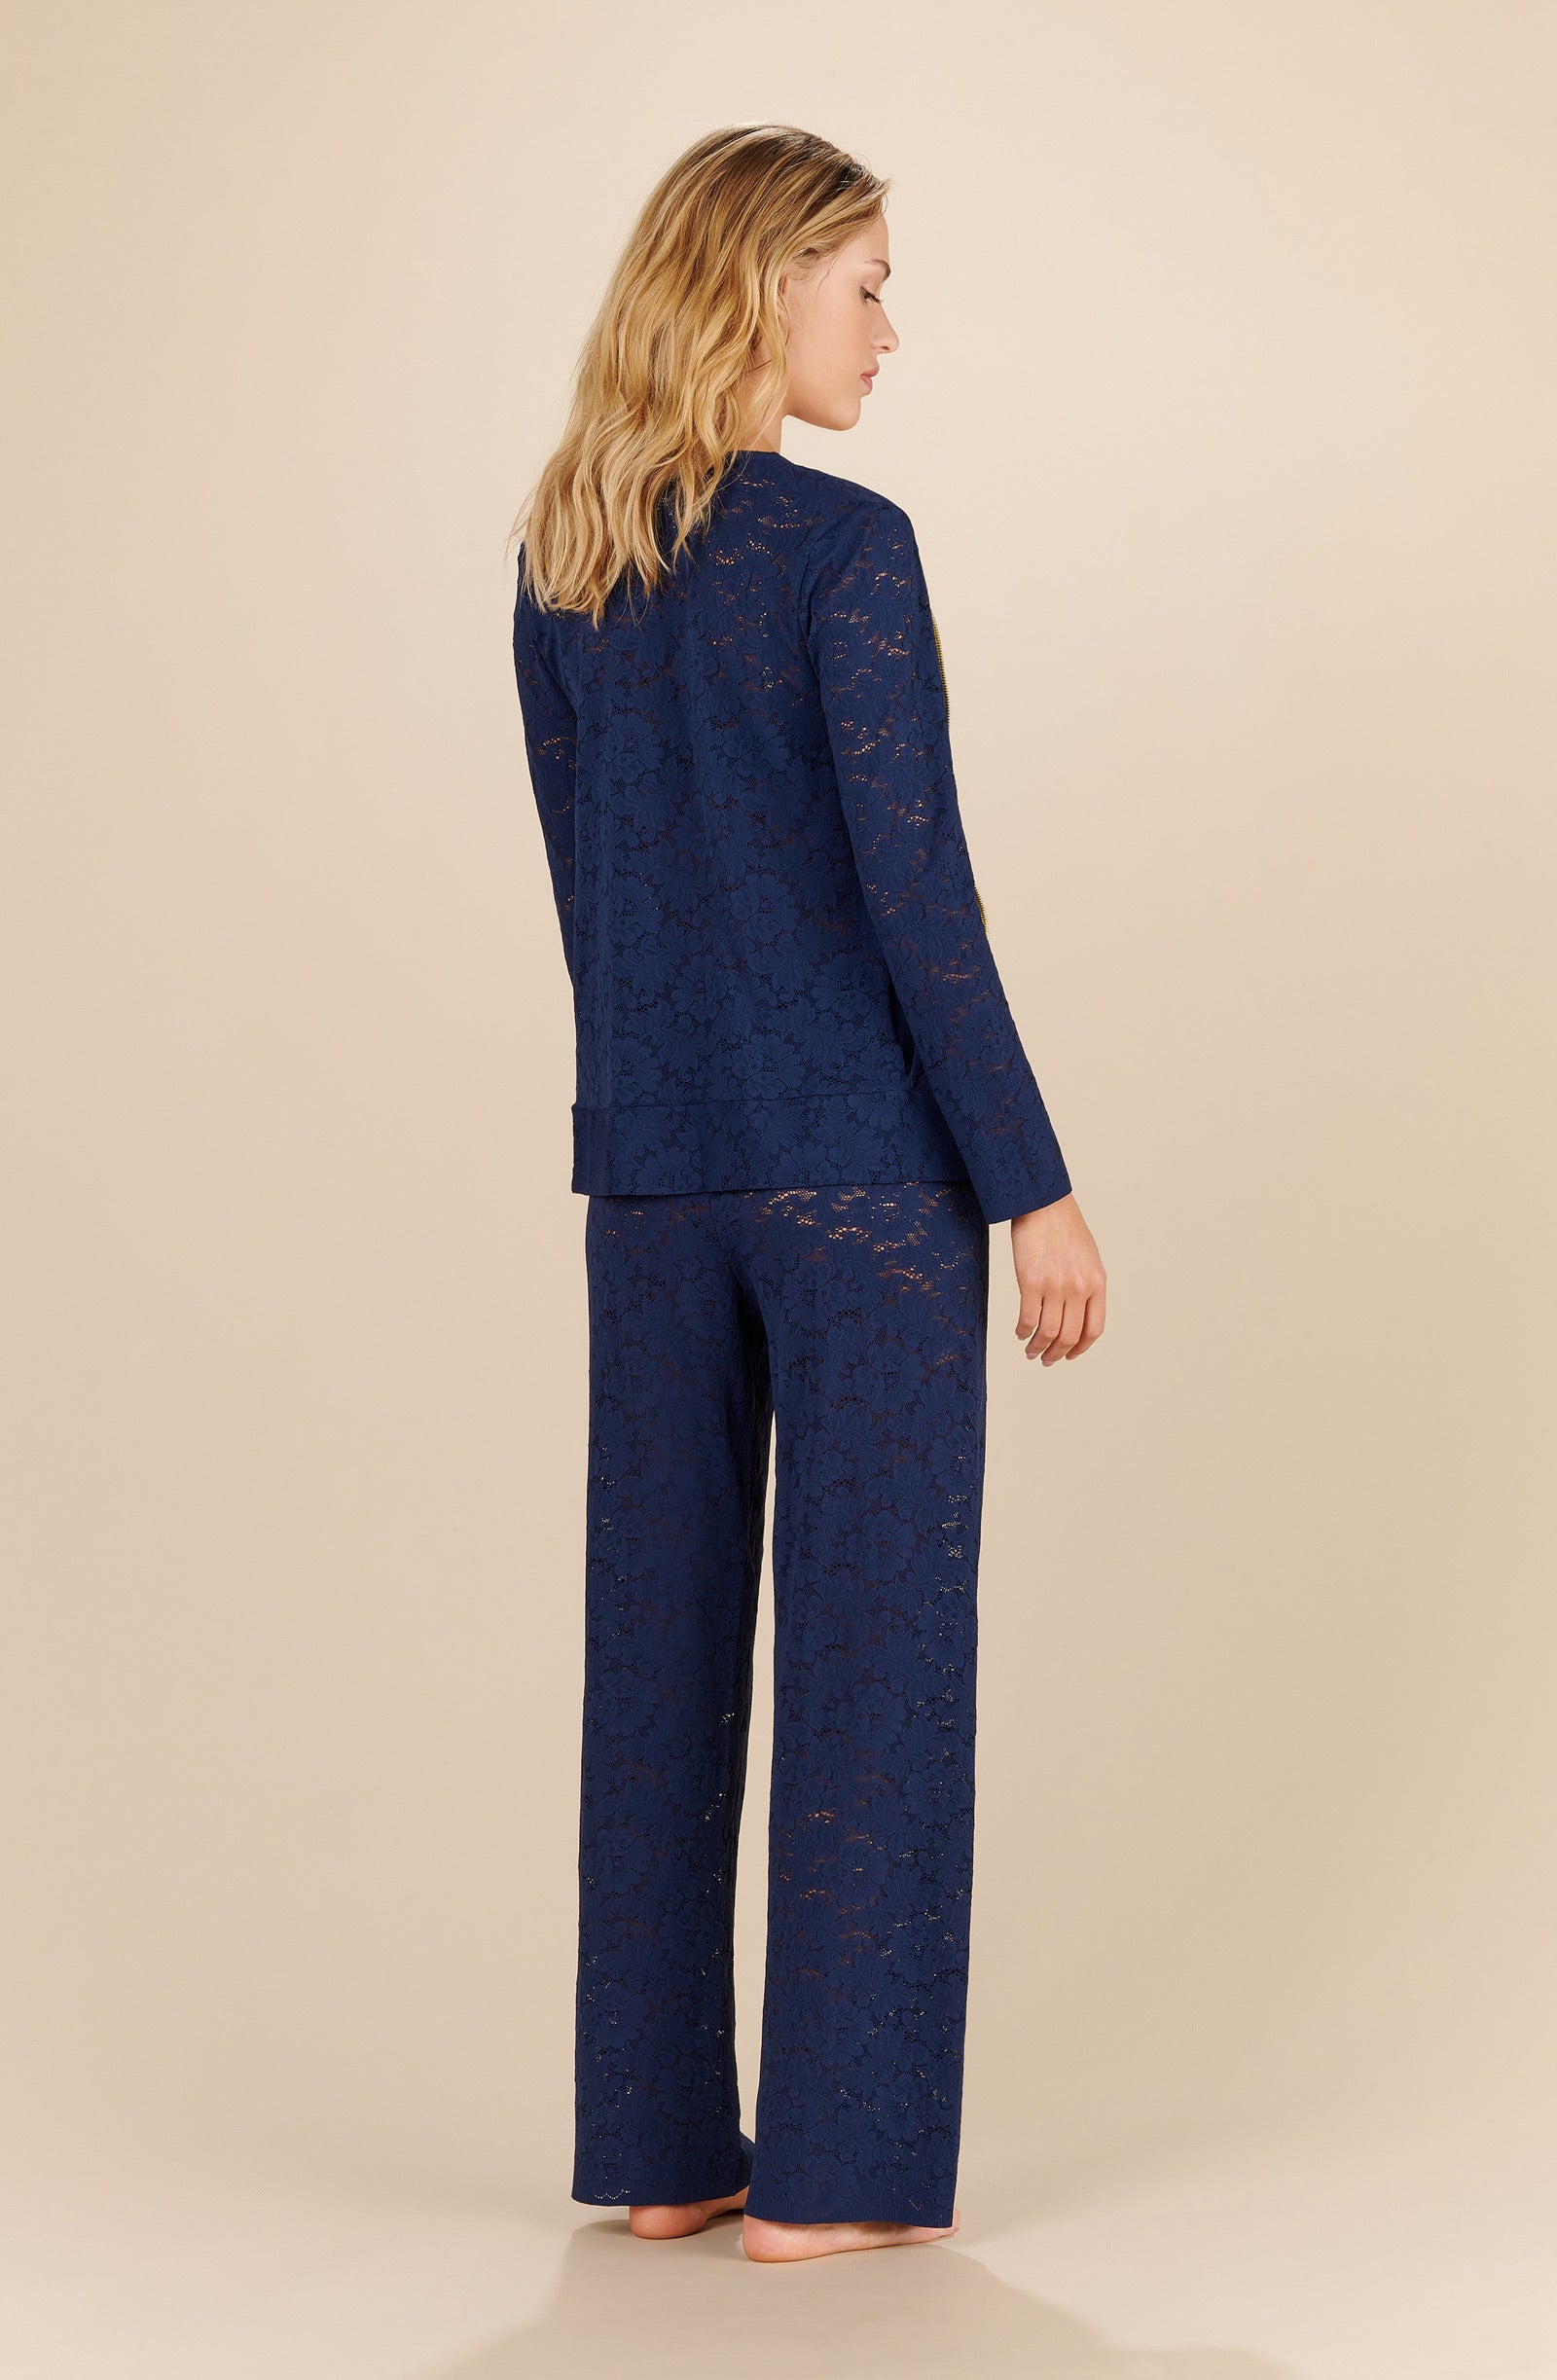 luyna - Navy lace cardigan